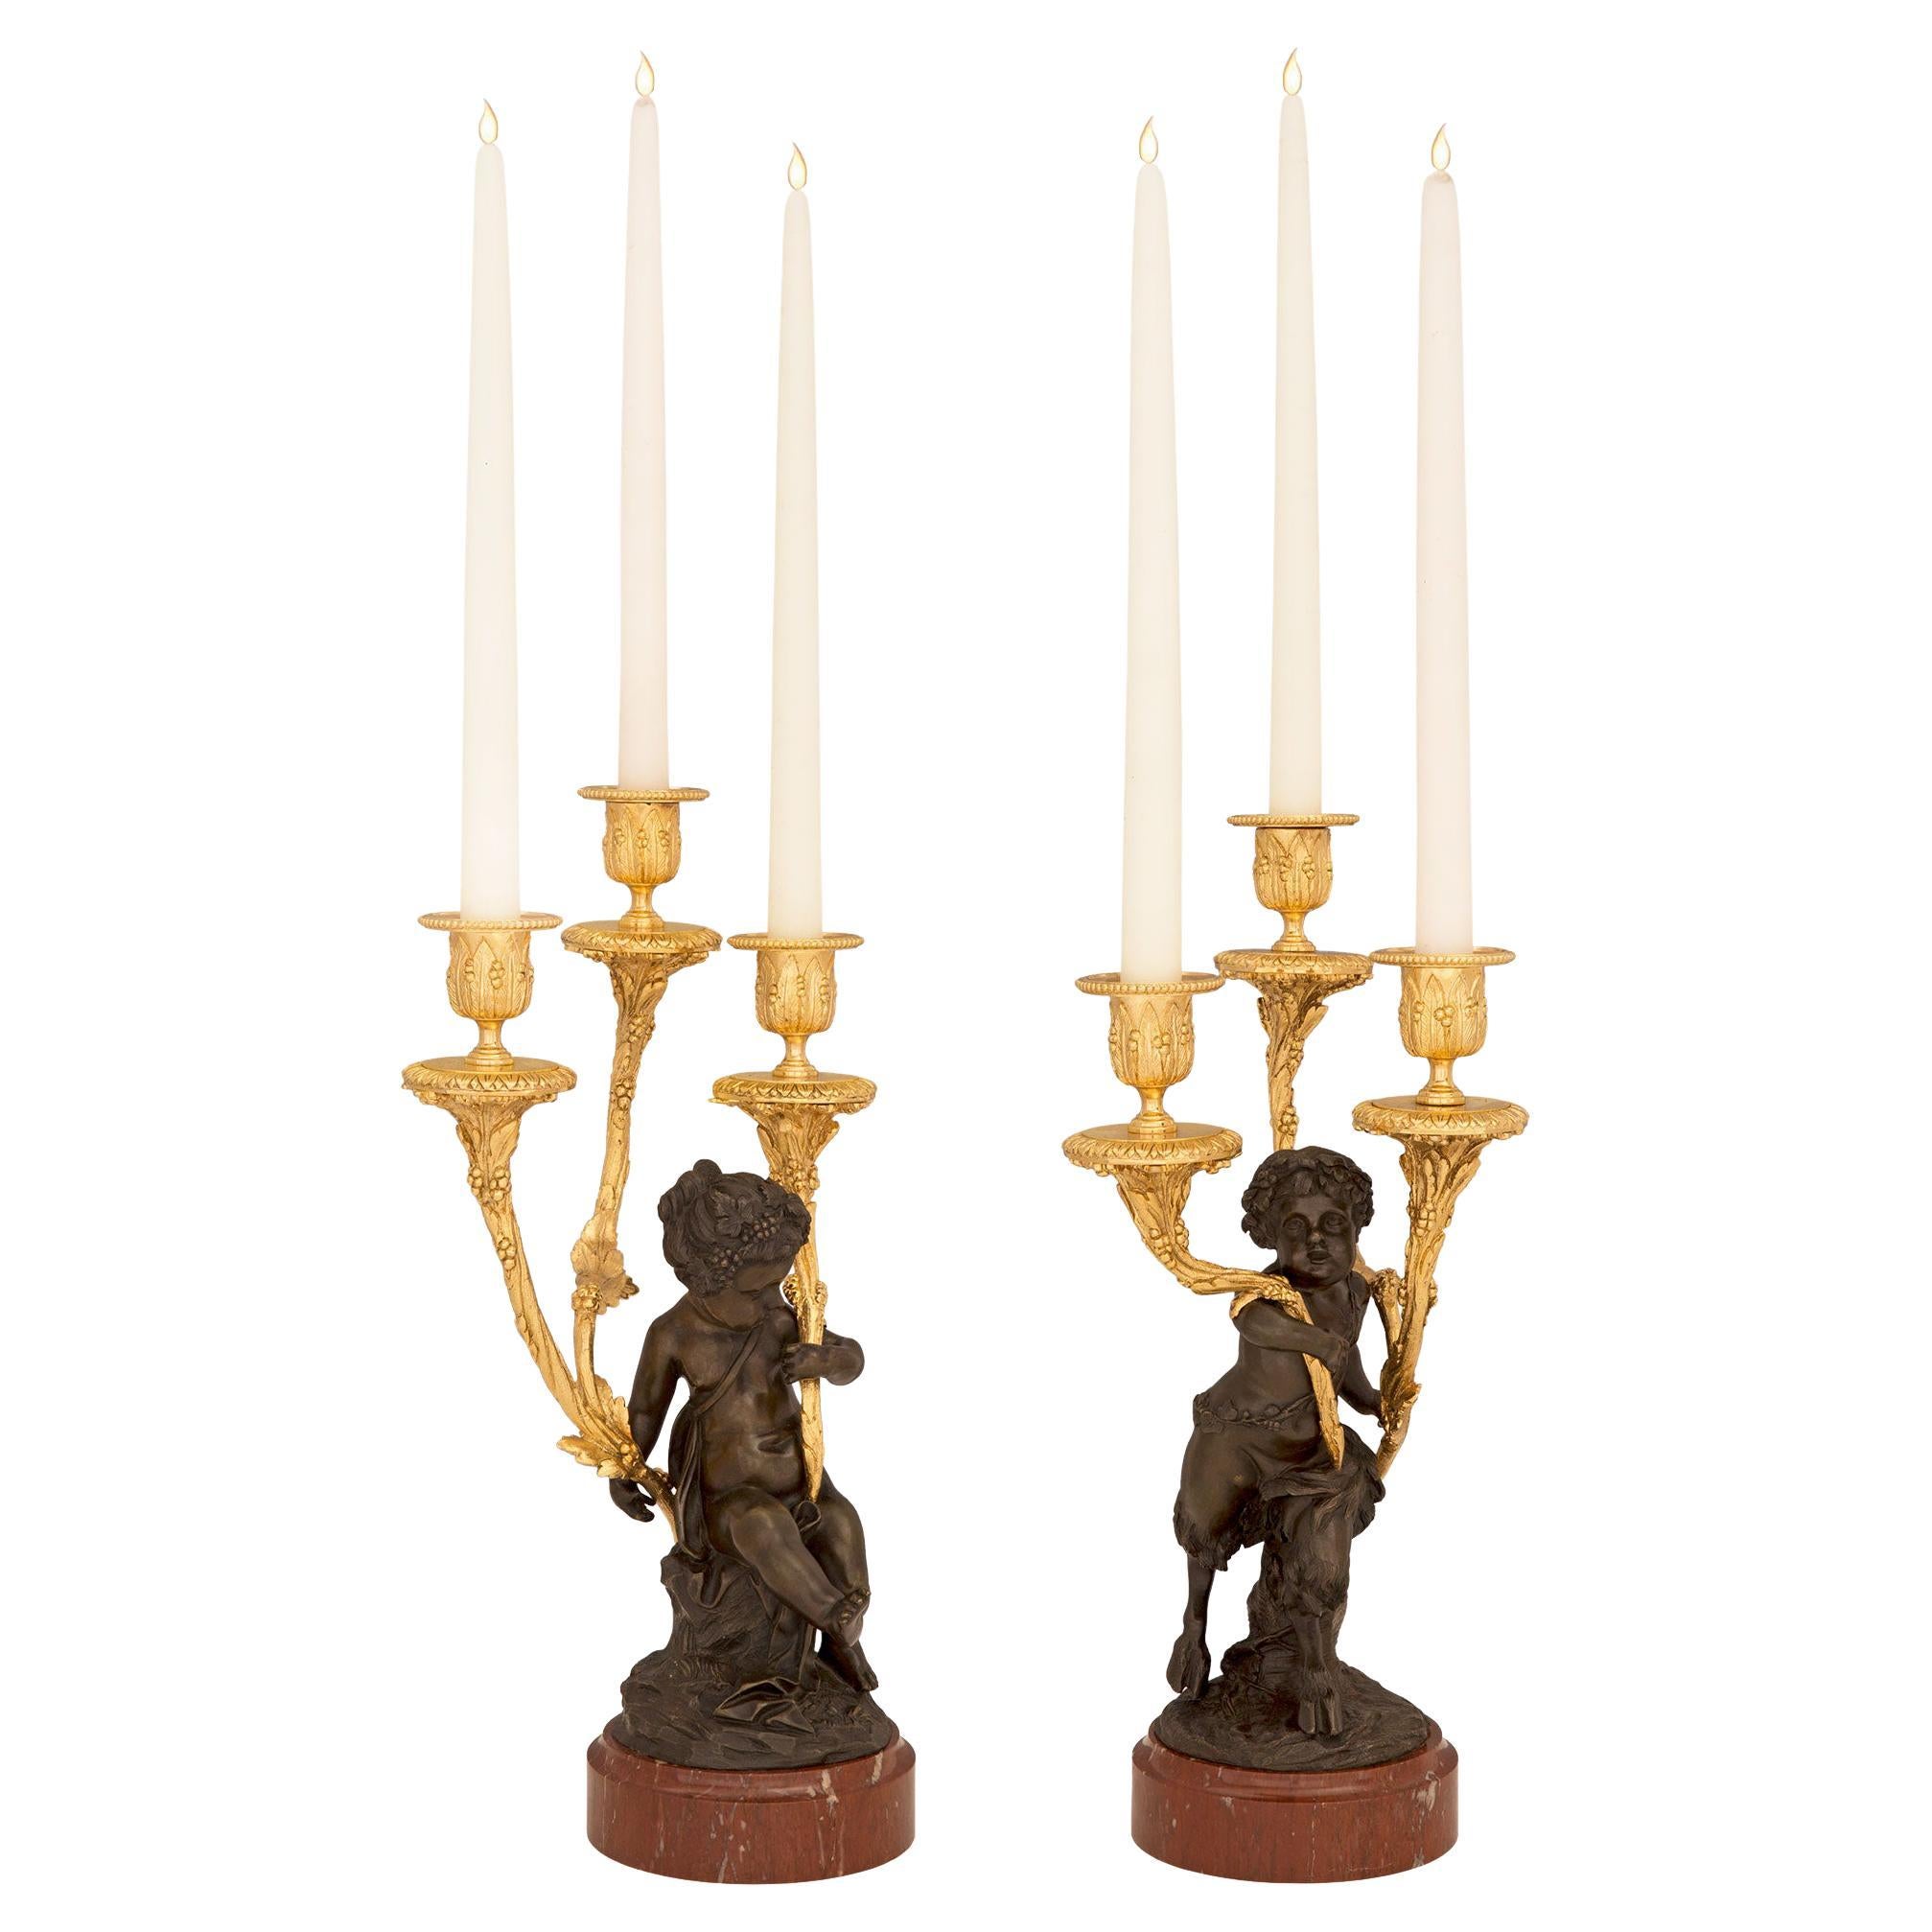 Pair of French 19th Century Louis XVI Style Candelabras, Attributed to Clodion